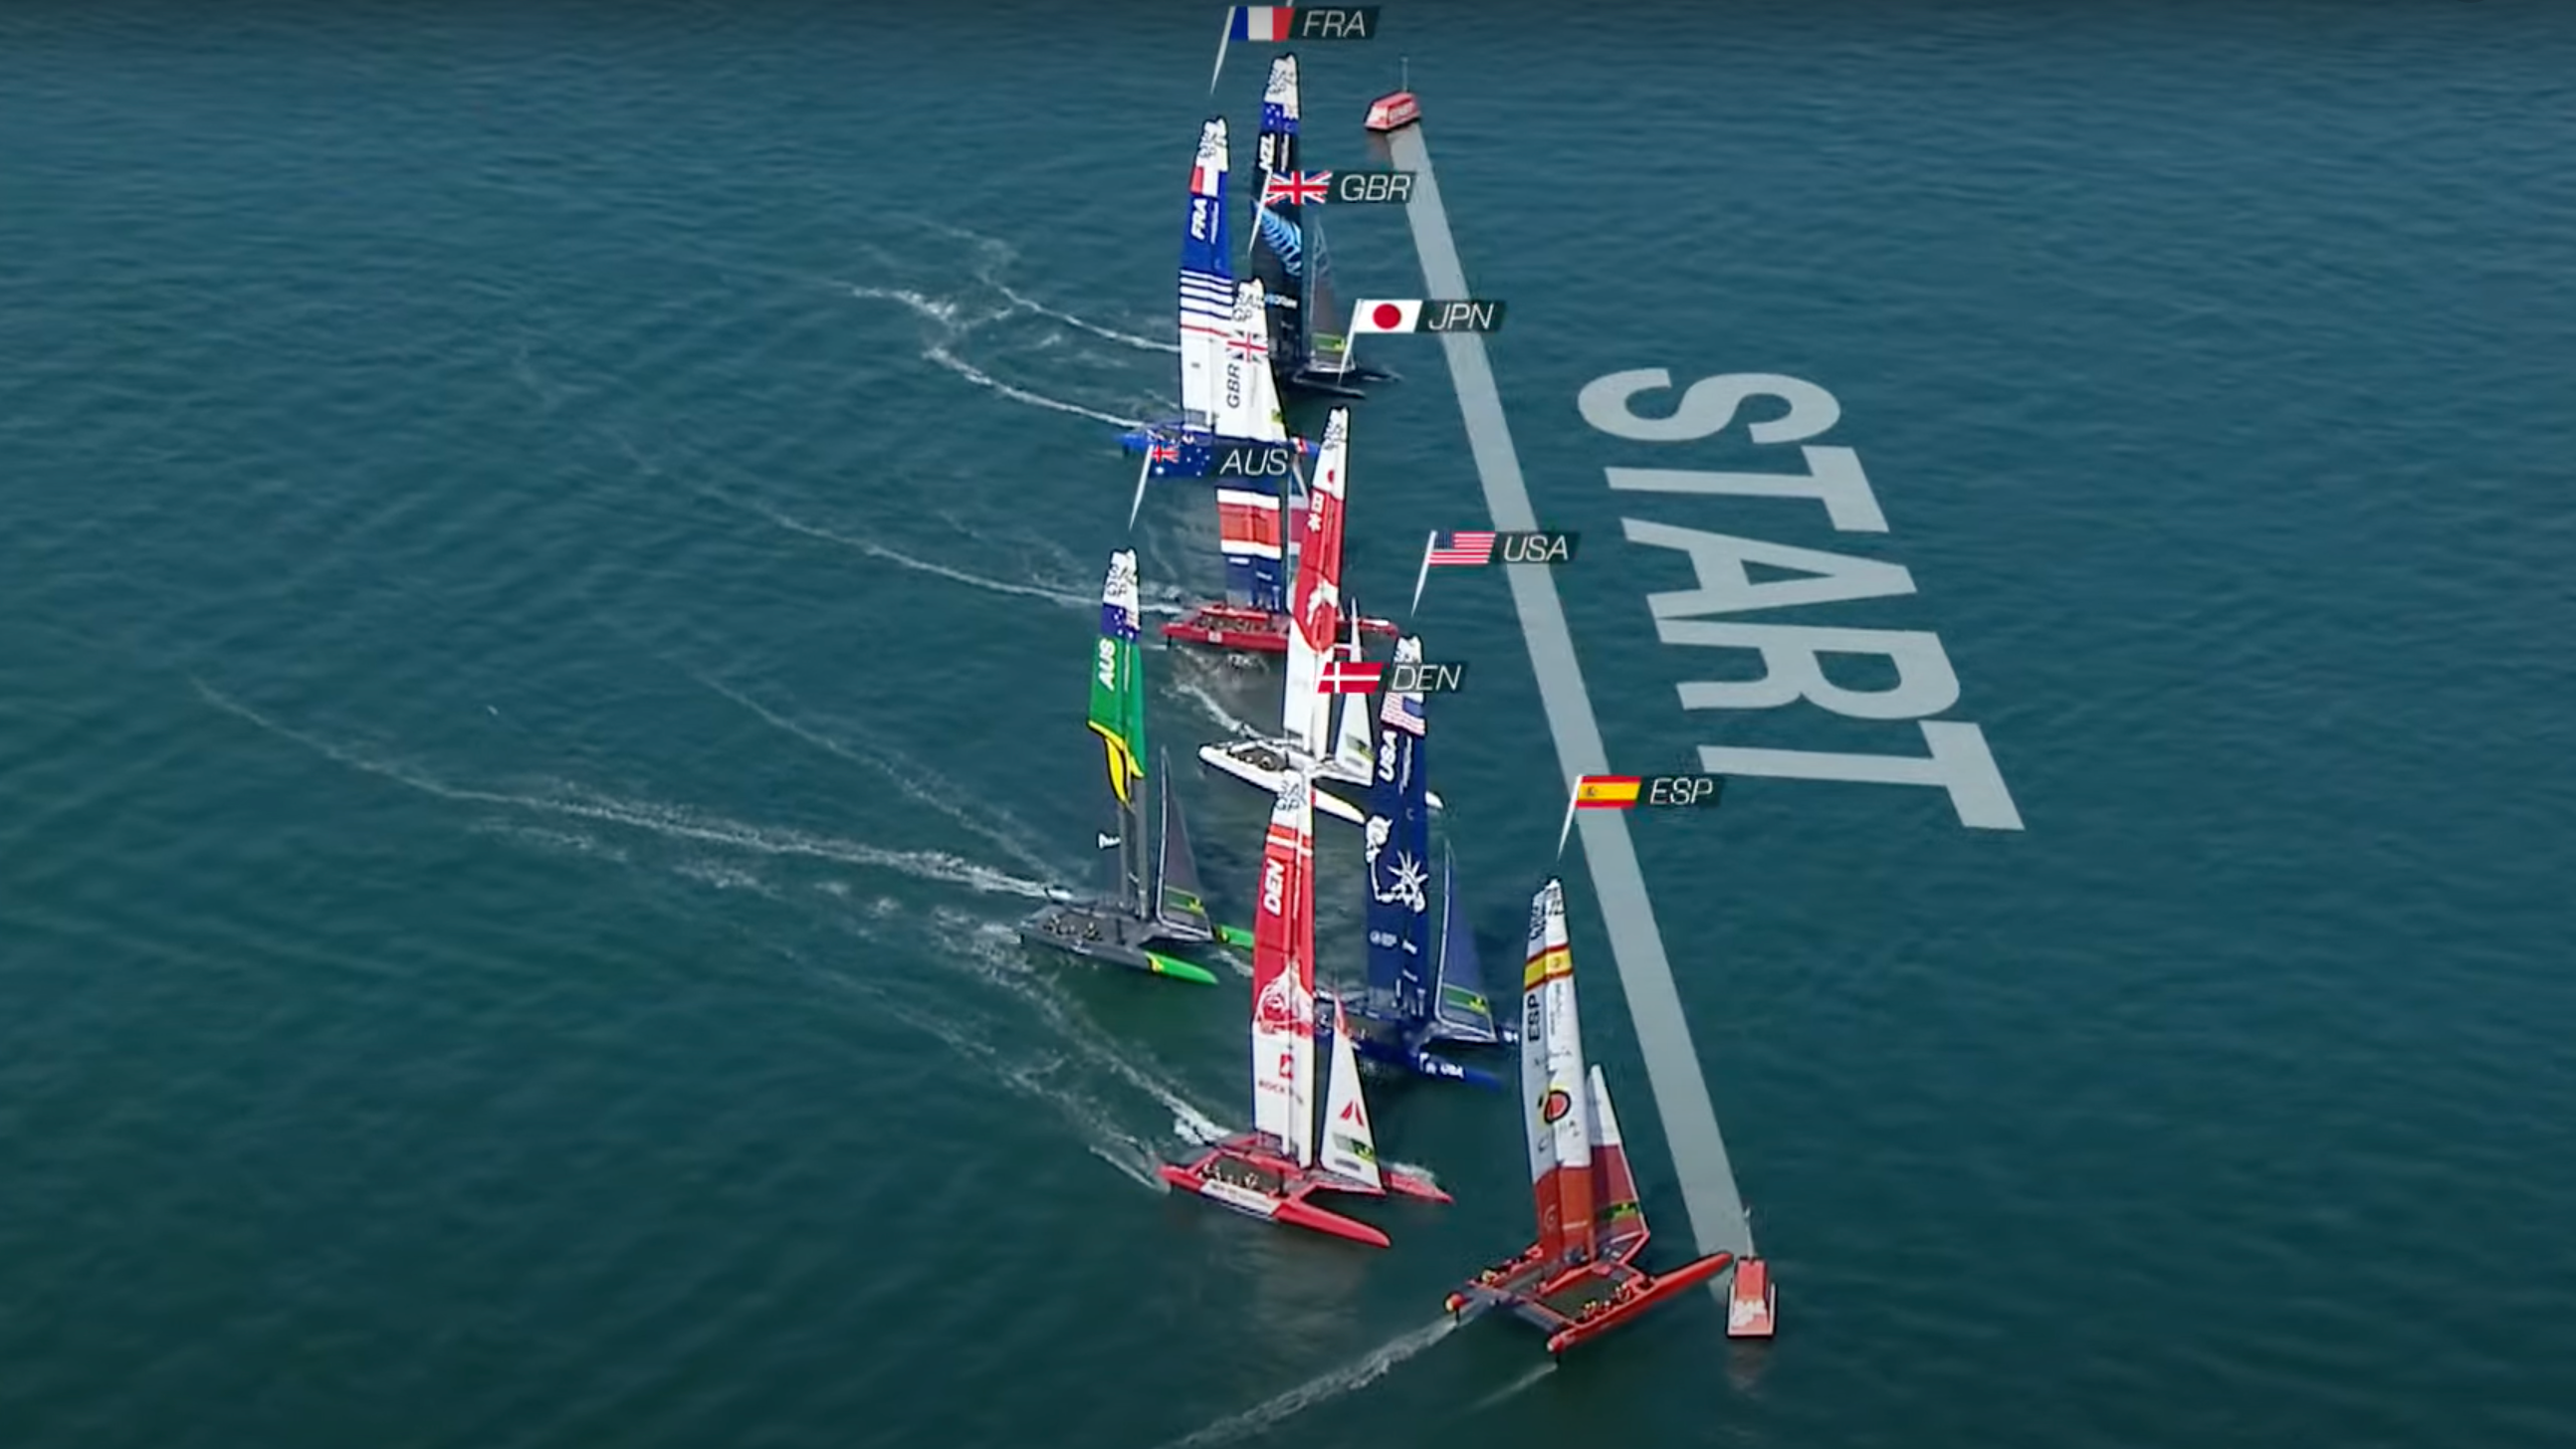 Spain was shown SailGP's first ever Black Flag for this hazardous starting maneuver in race 3